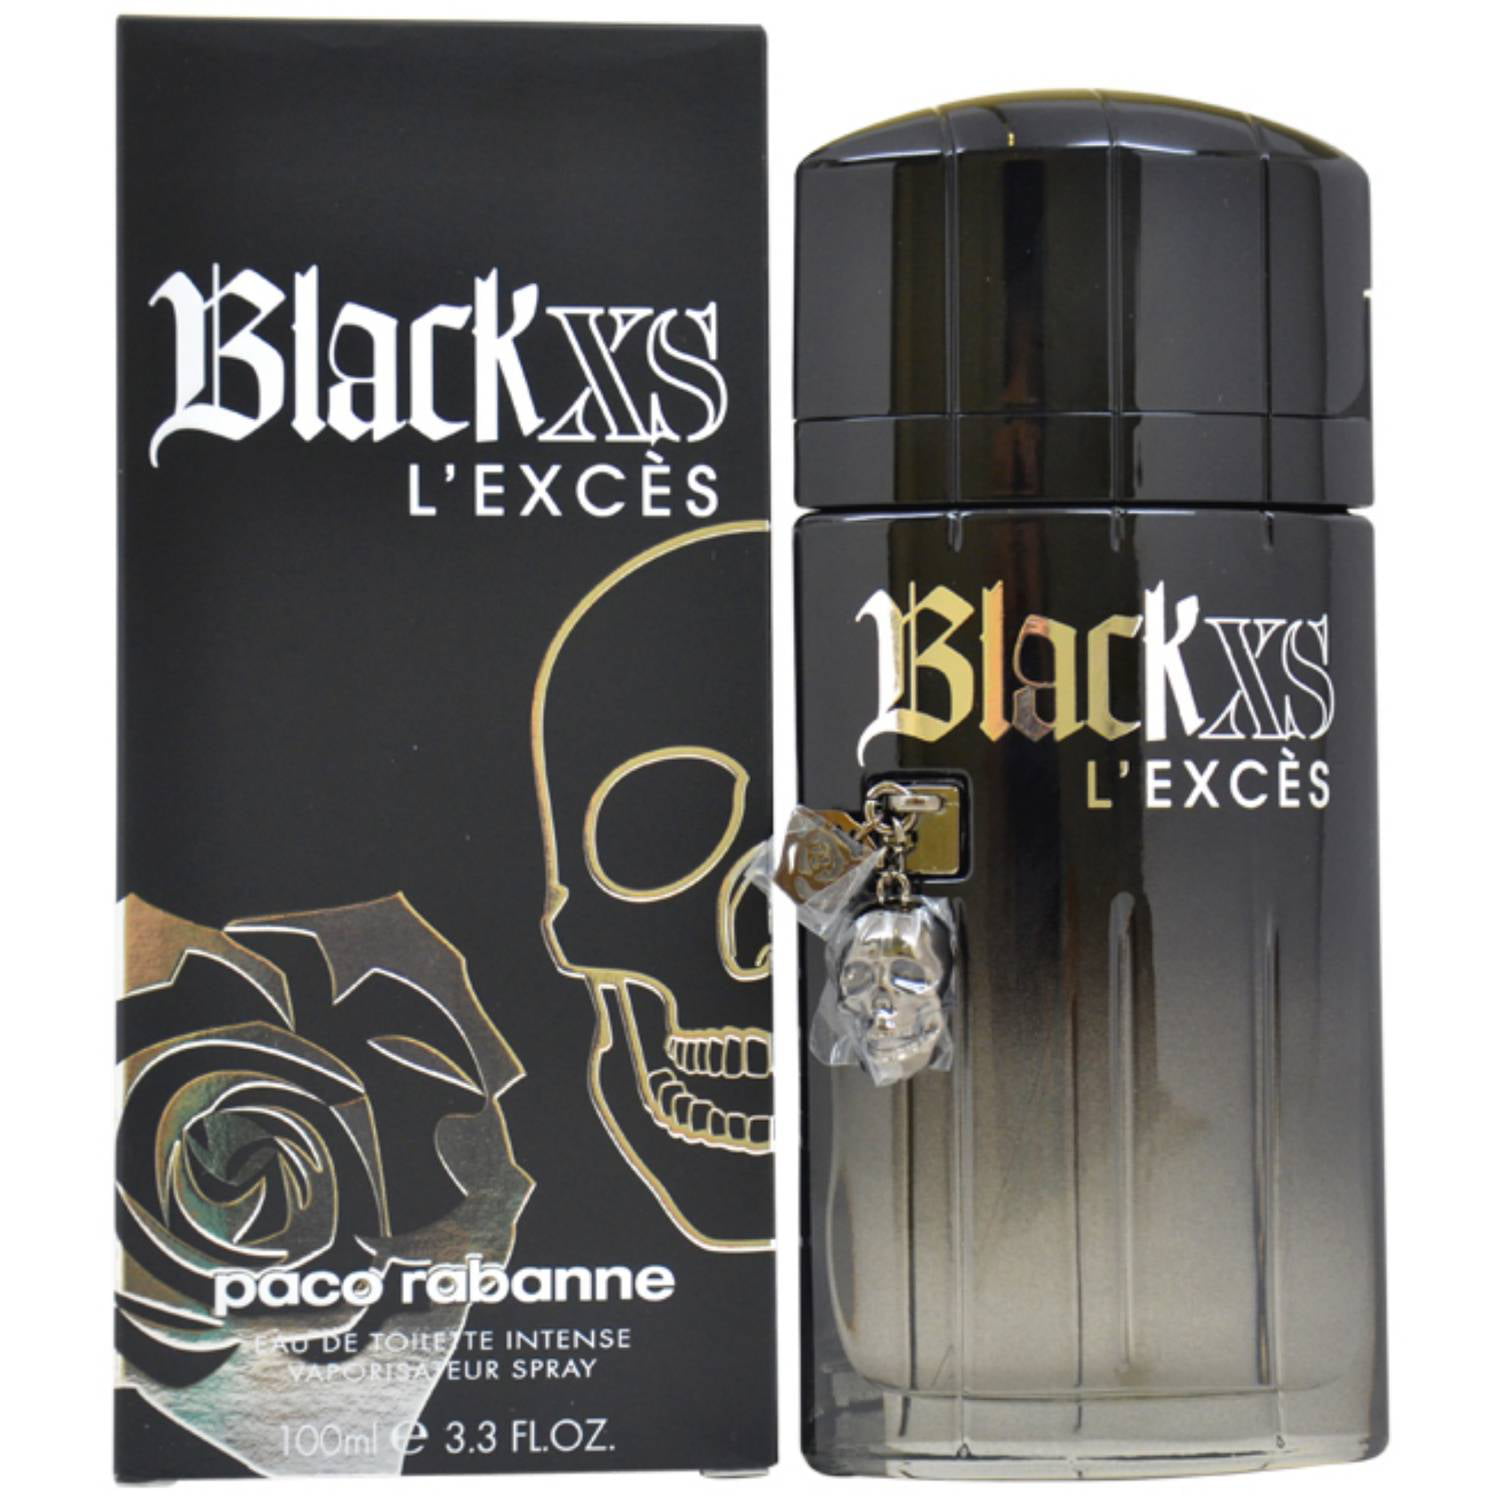 Пако рабан блэк мужские. Paco Rabanne Black XS L'exces for him. Paco Rabanne Black XS L'exces мужской. Paco Rabanne мужские Black XS Lexce. Paco Rabanne Black XS L exces.